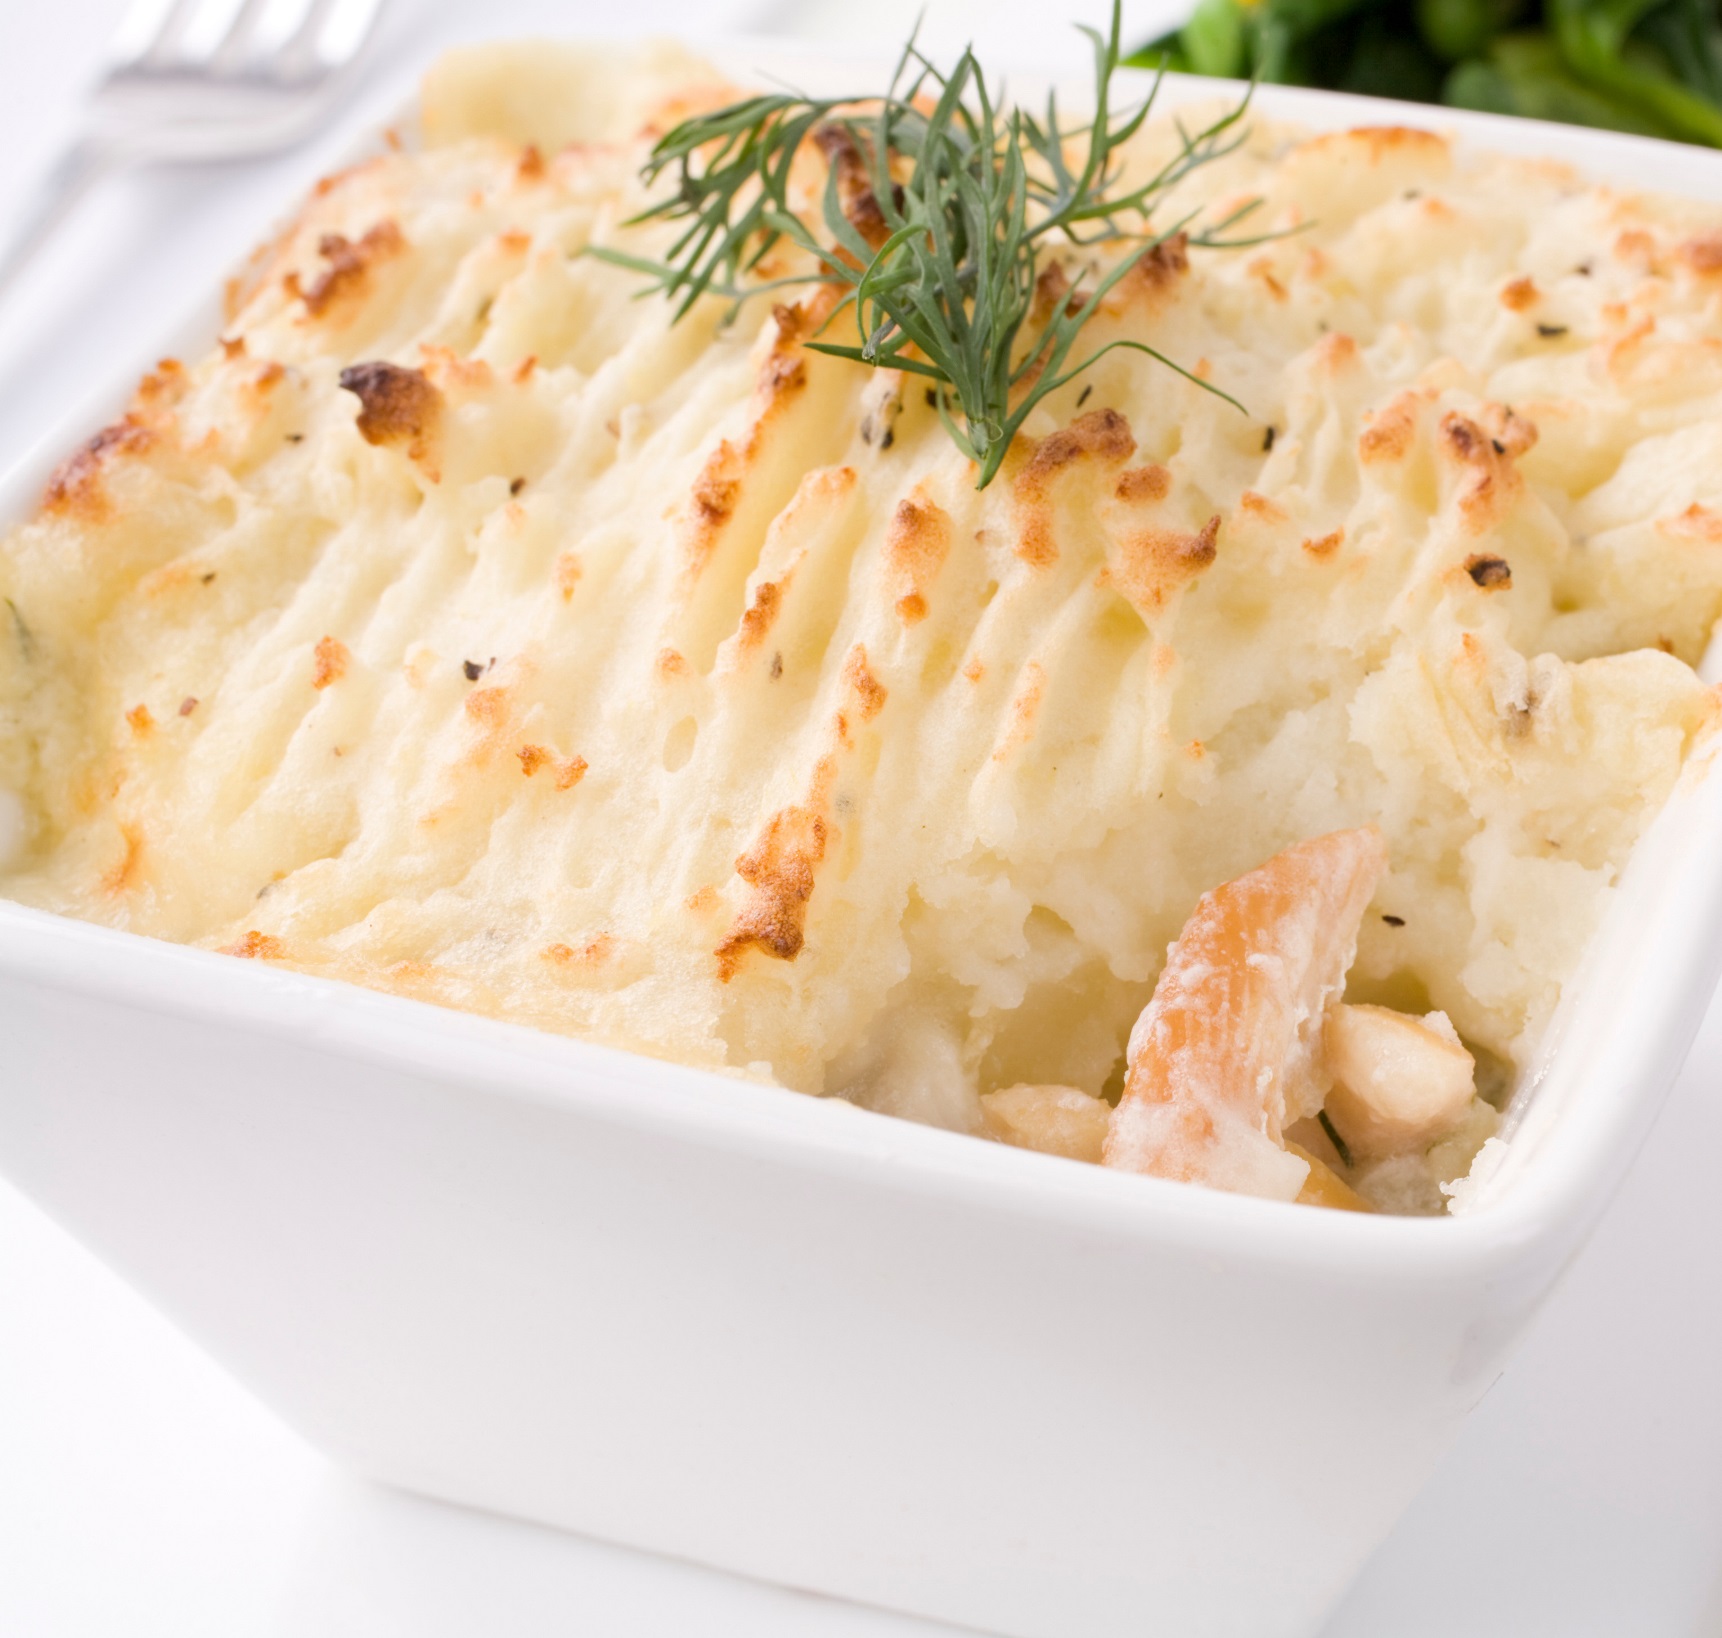 A square white bowl containing smoked haddock in a creamy sauce, with a mashed potato topping garnished with dill.